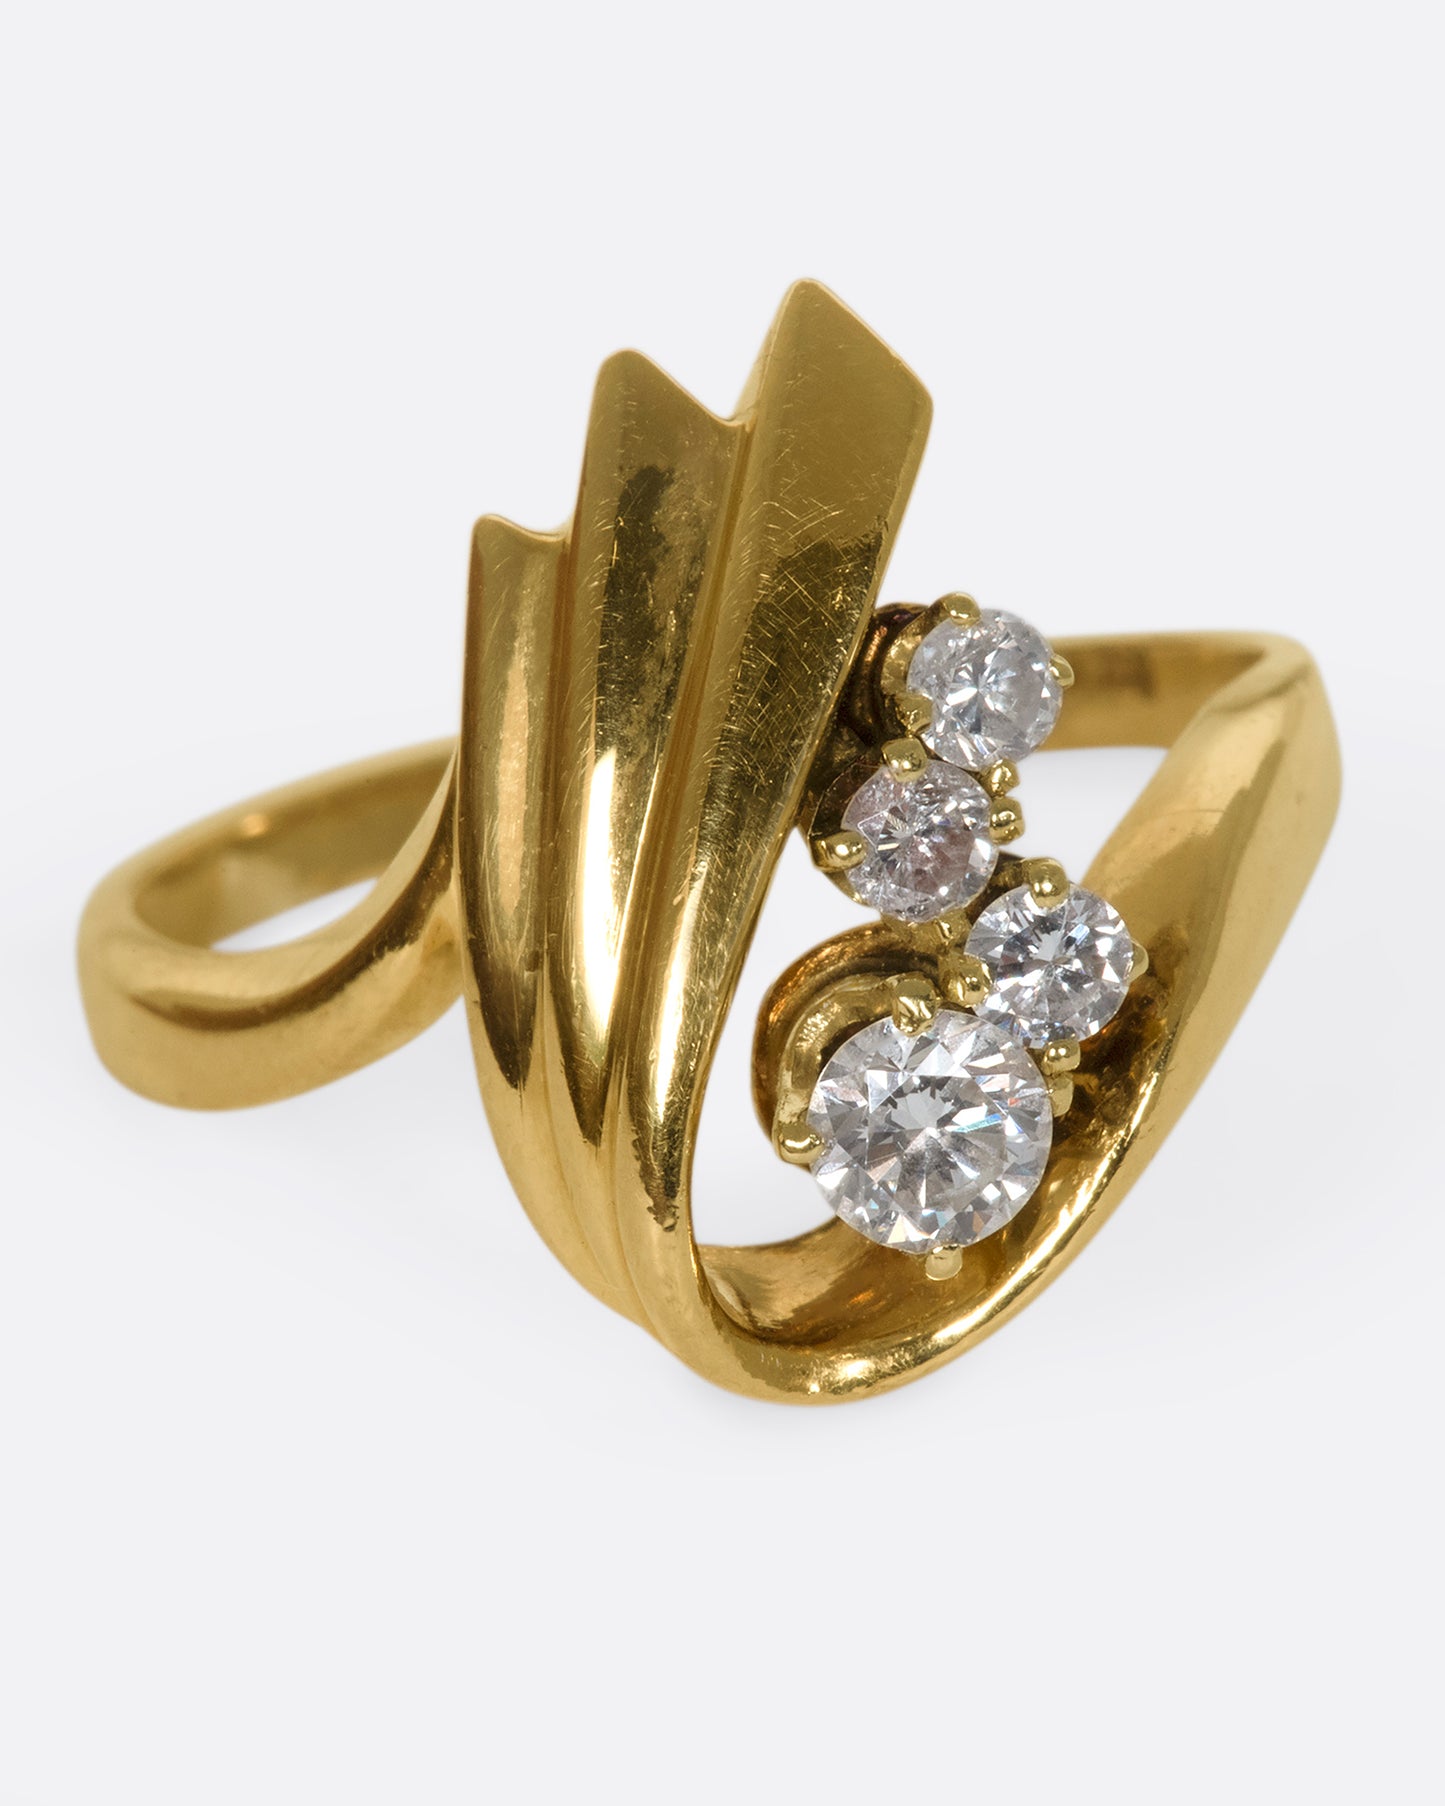 A vintage 14k gold U-shaped ring with four round diamonds resting in the center.